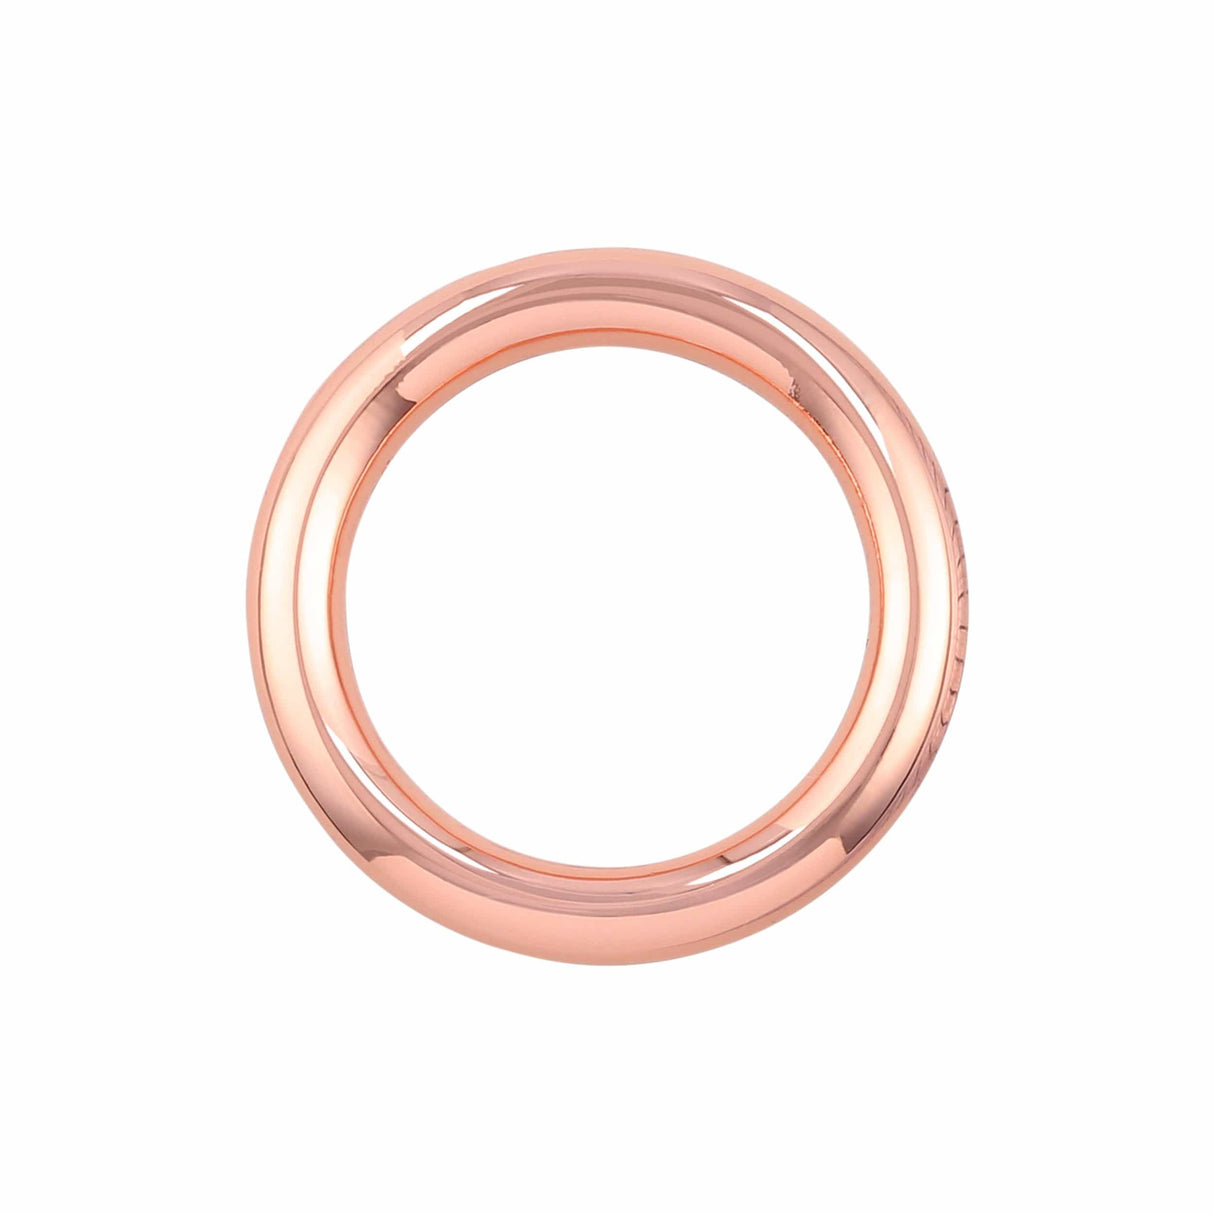 Ohio Travel Bag 3/4" Shiny Copper, Solid Round Ring, Zinc Alloy, #P-3157-CPR P-3157-CPR